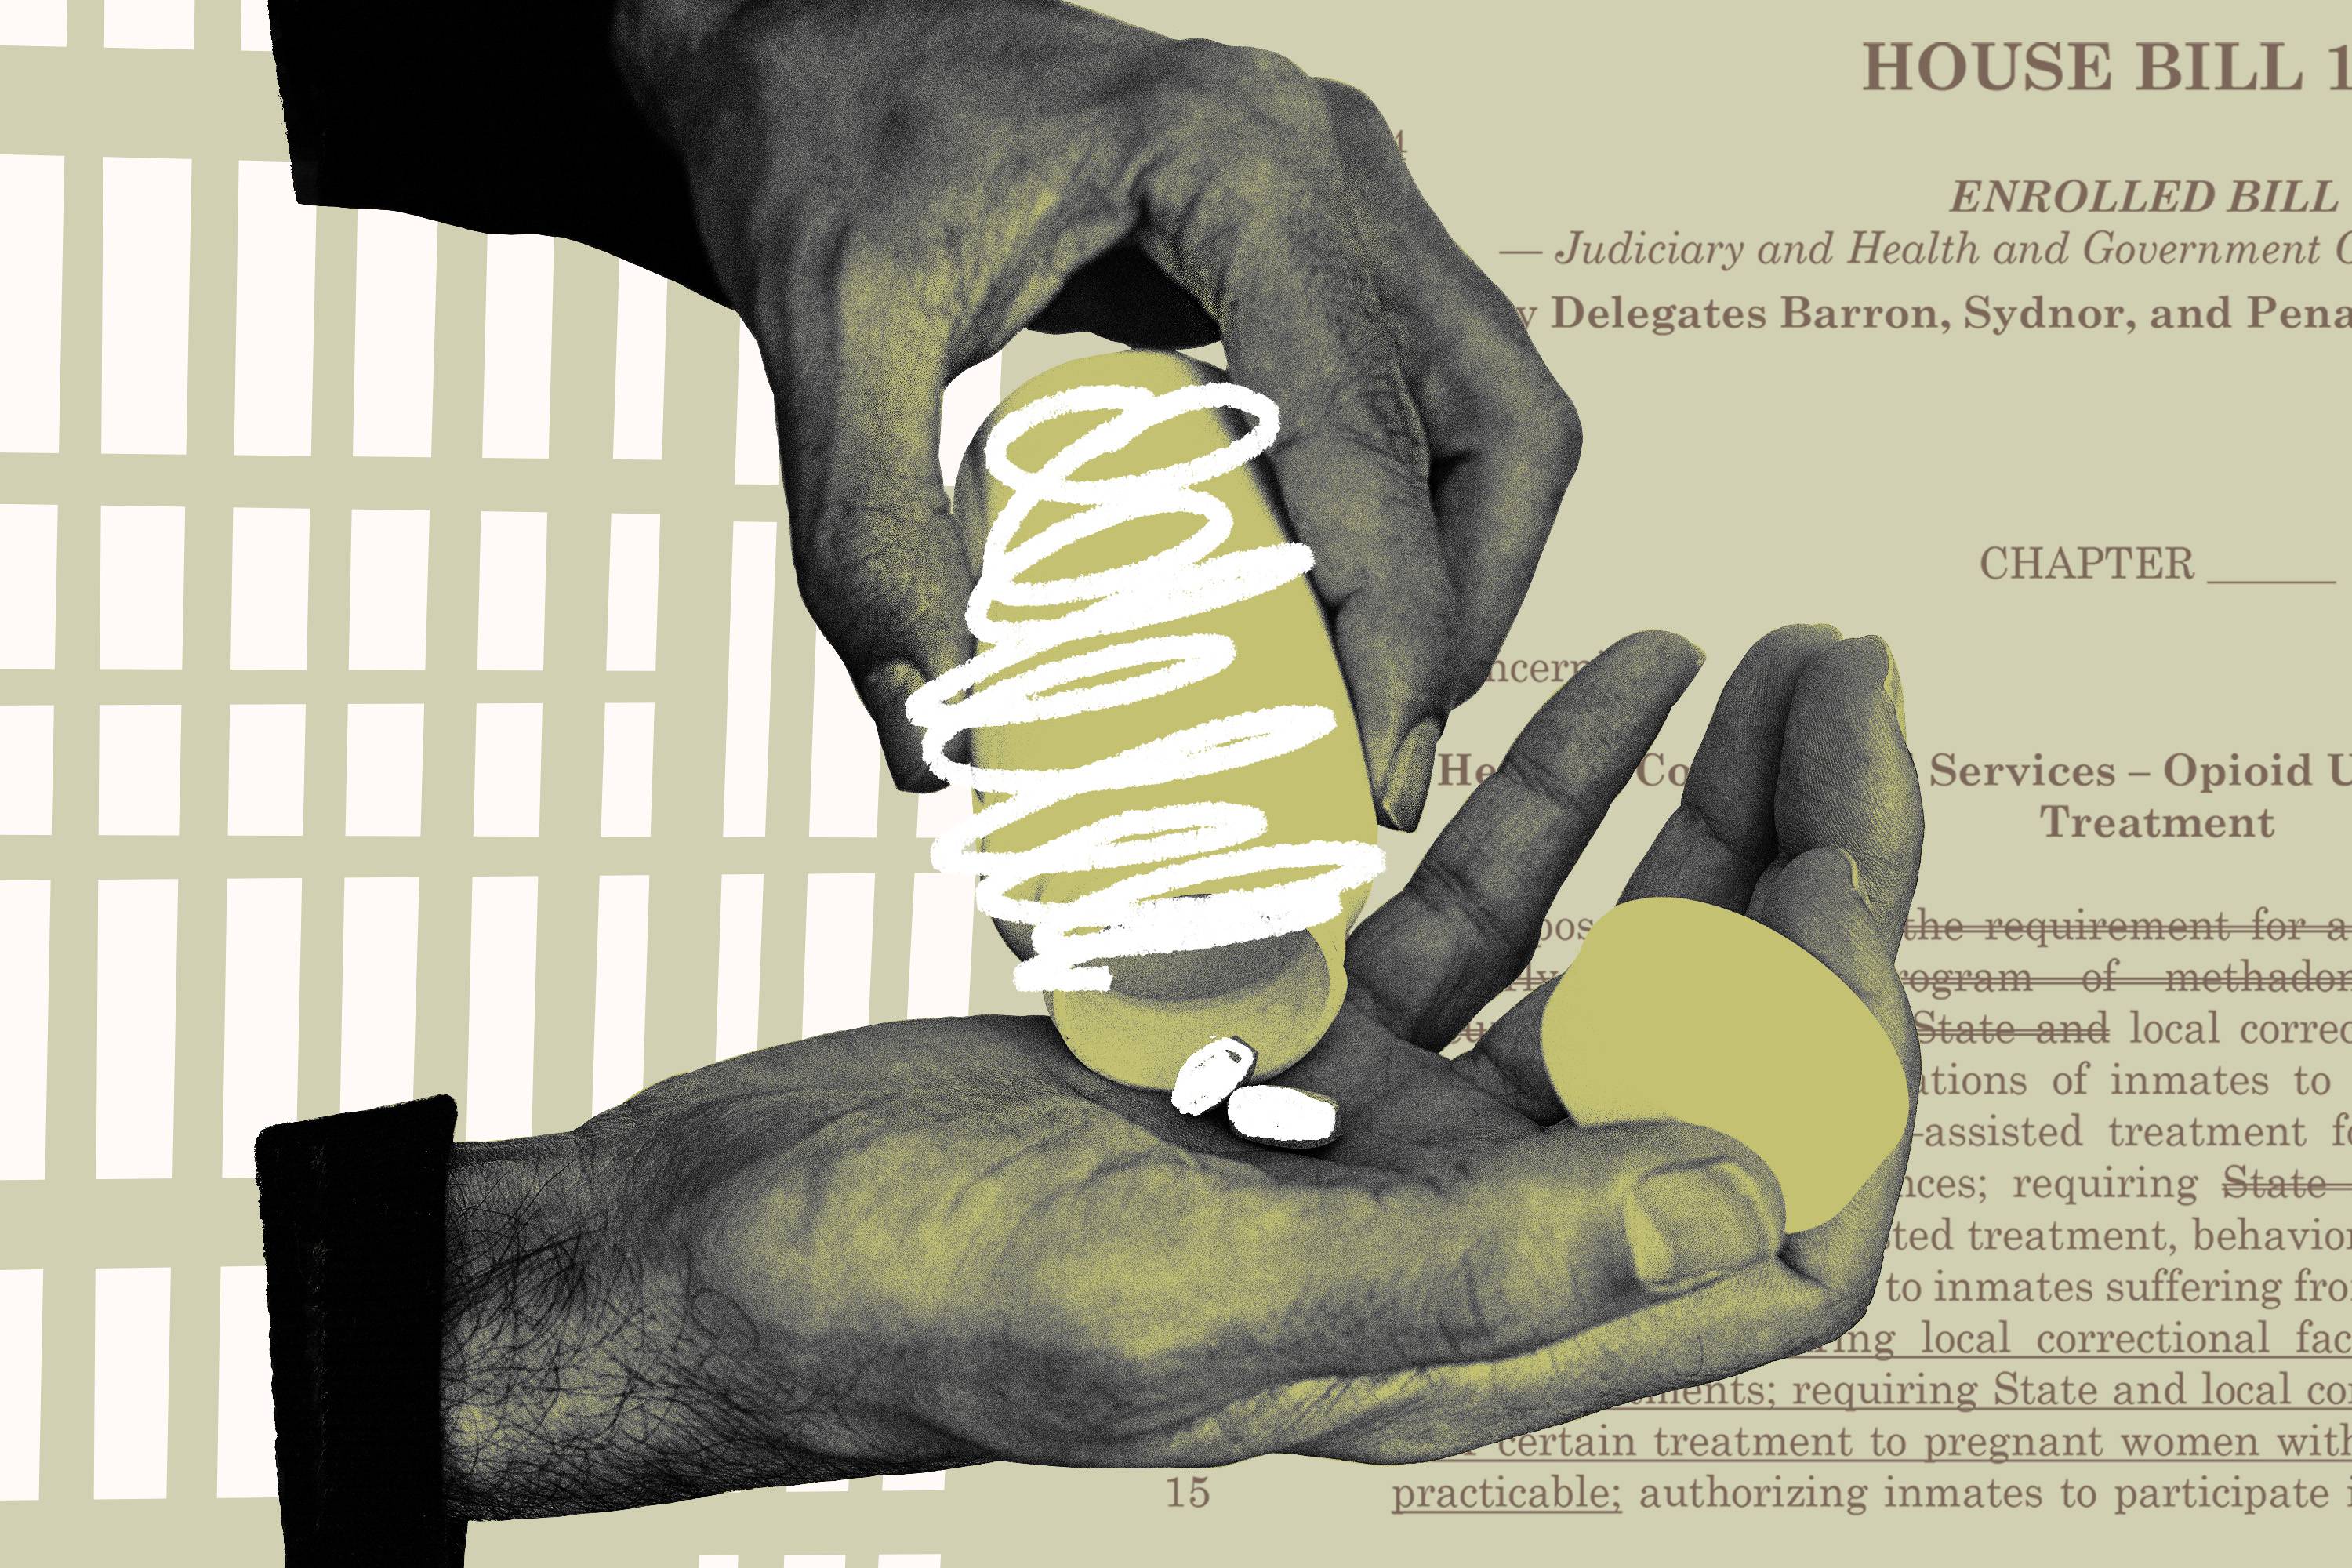 Photo collage showing scribbled-out medication bottle and pills in man’s hands, with prison bars in background on left and text from House Bill 116 on right.